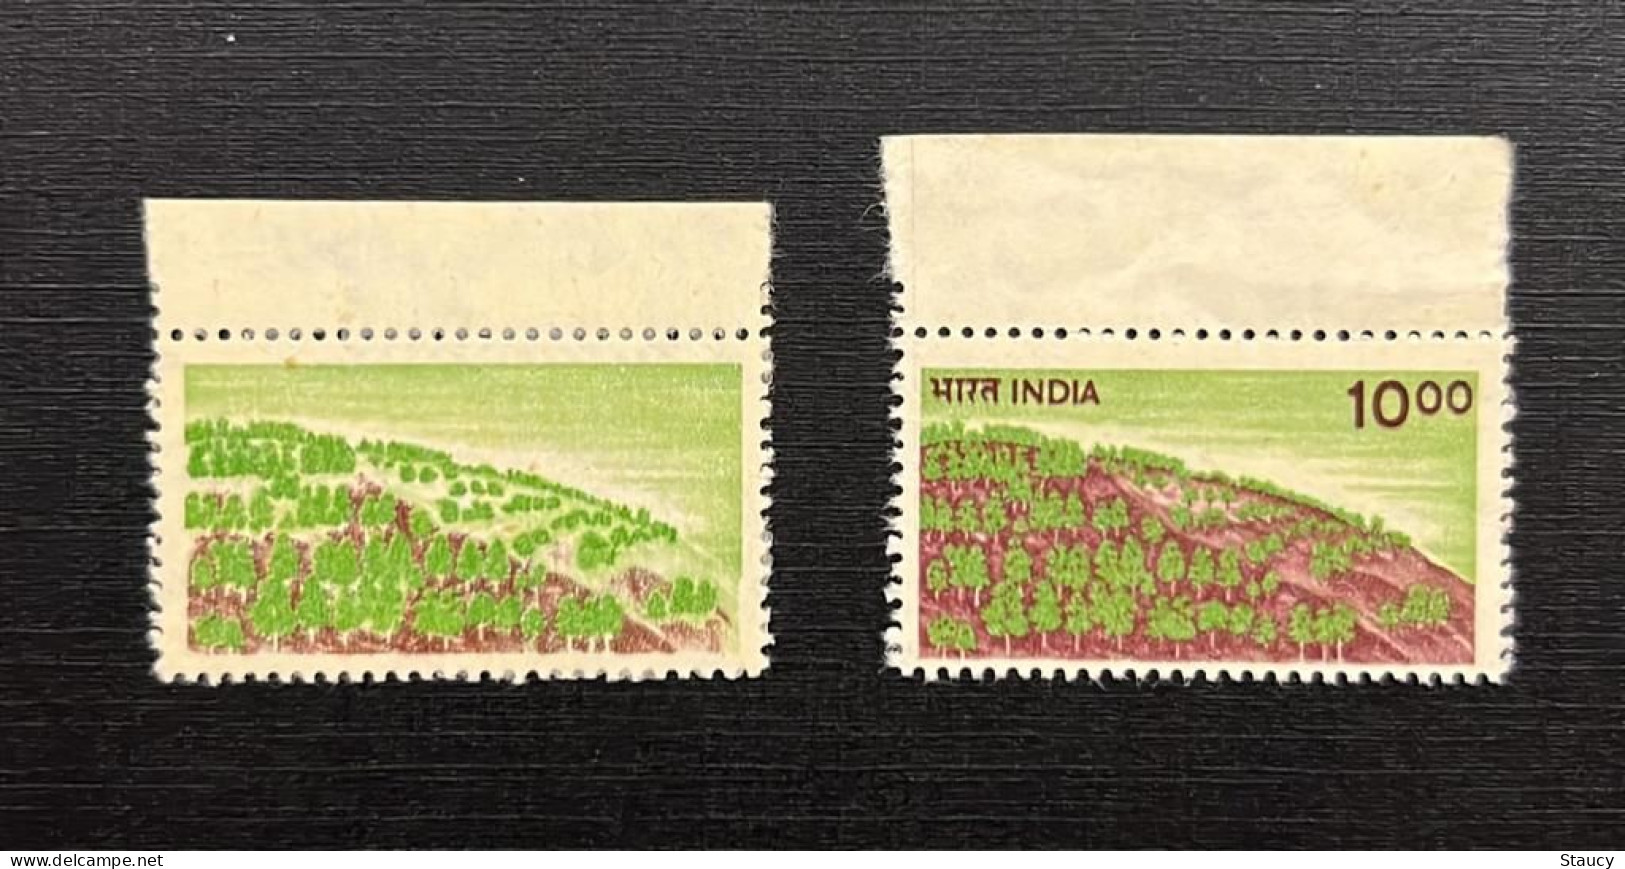 India 1988 Error 6th Definitive Series, Rs.10  Afforestation / Tree Error "partly BROWN COLOUR OMMITTED" MNH As Per Scan - Oddities On Stamps